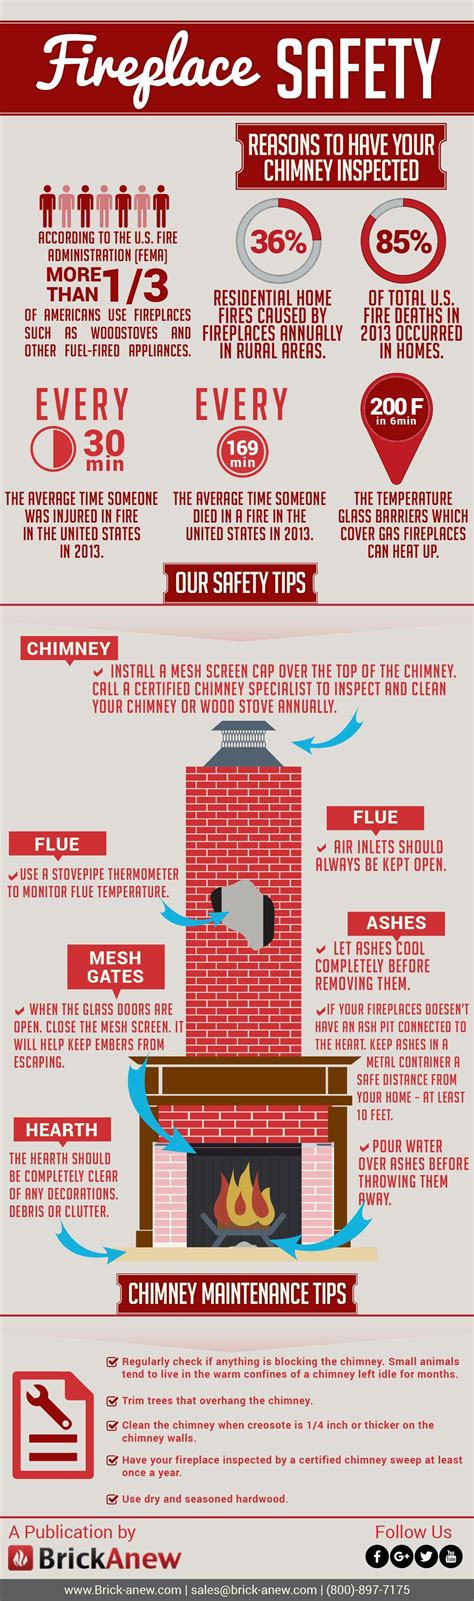 fireplace safety infographic safely heating your home this winter fireplace safety safety